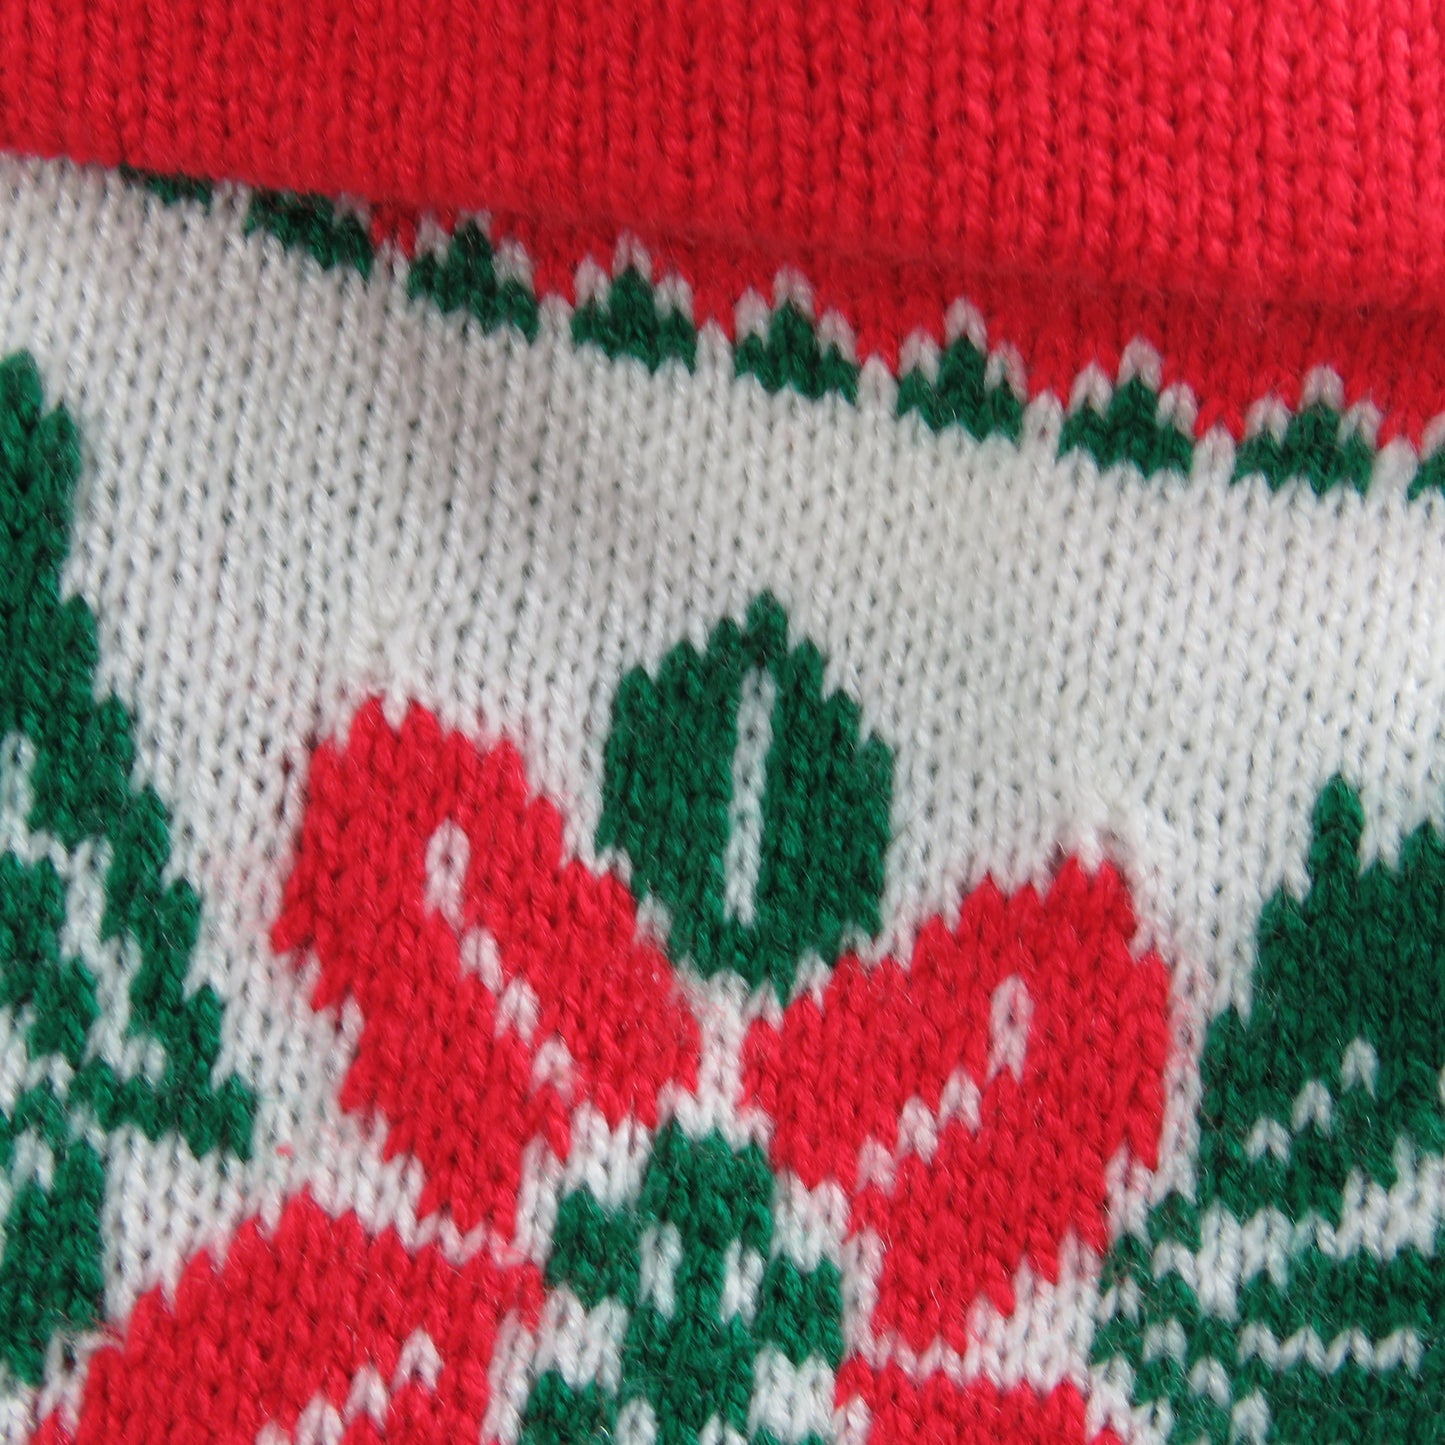 Vintage Knit Christmas Stocking Poinsettia Happy Holidays KNitted Red Green Sweater Print - At Grandma's Table